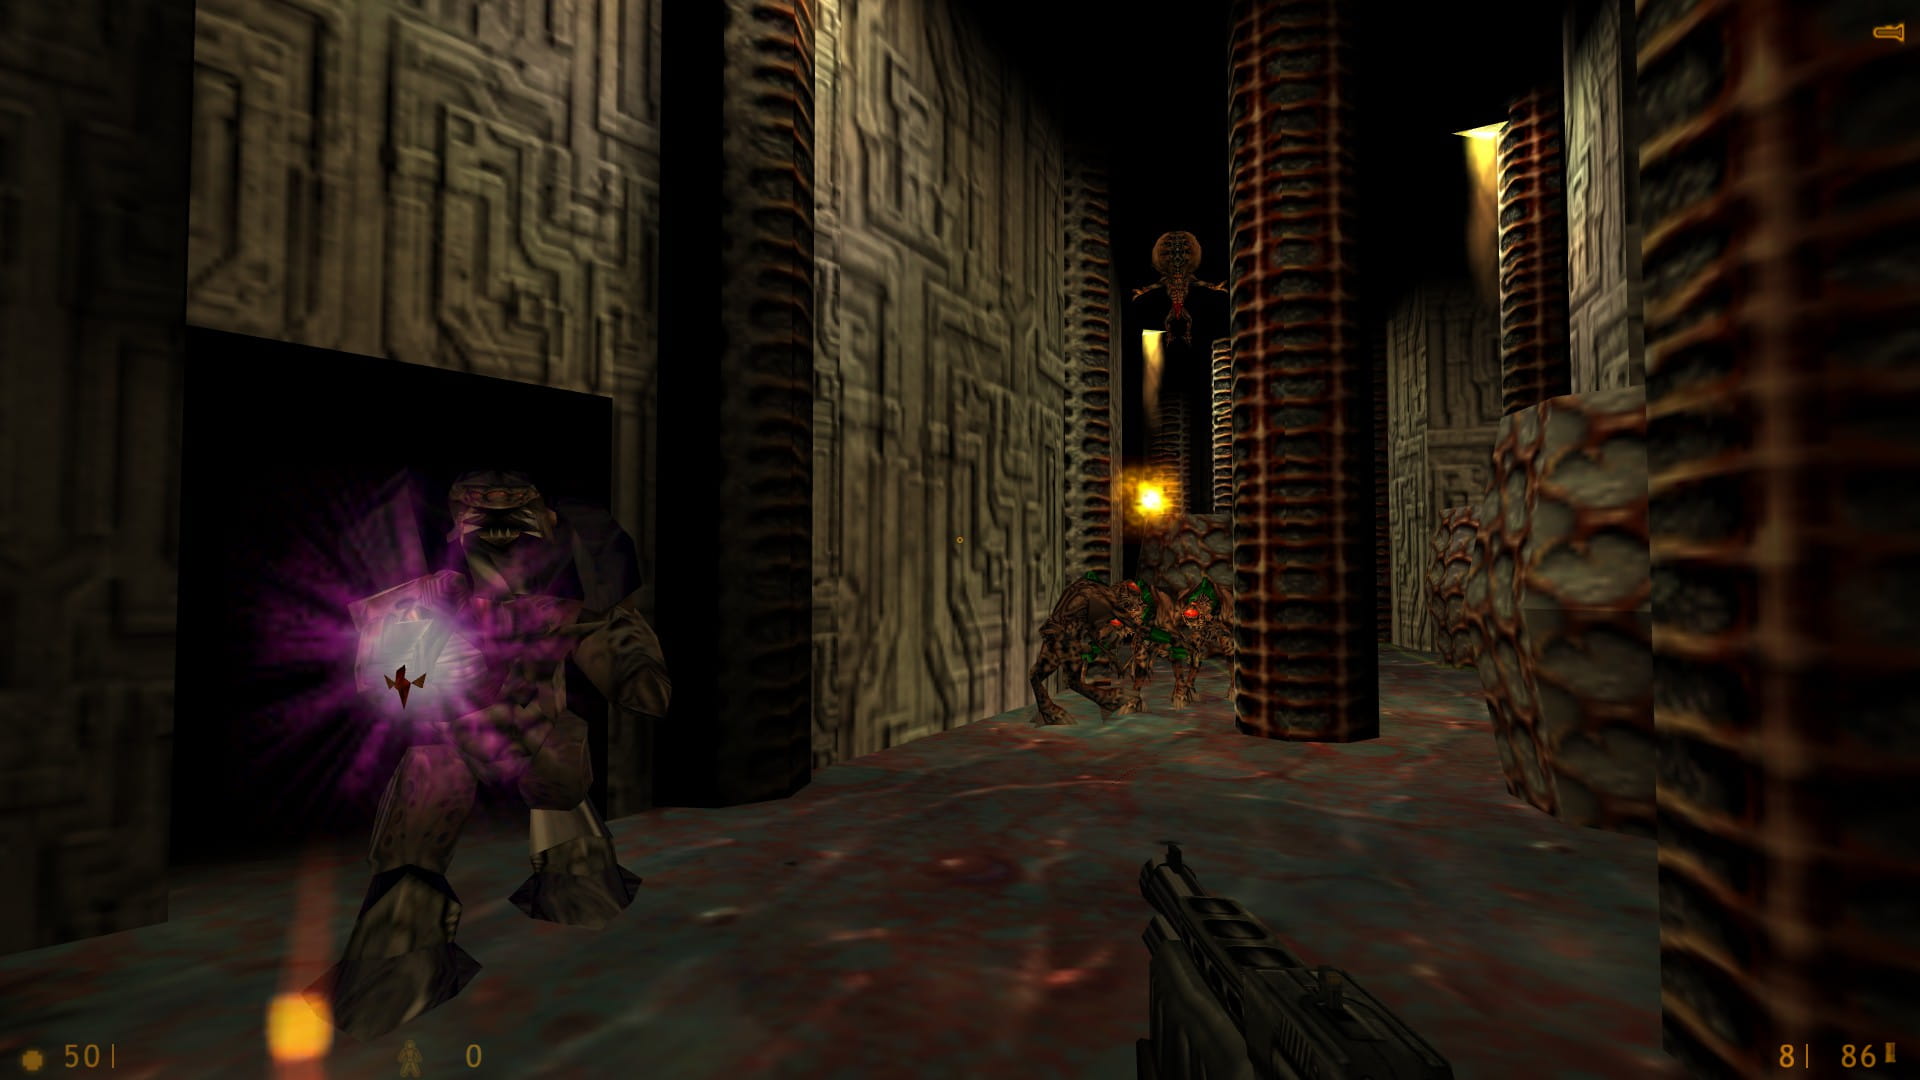 A screenshot of Half-Life. At an extraterrestrial corridor, an alien grunt fires at the player while a group of alien slaves convenes nearby and an alien controller flies over them.